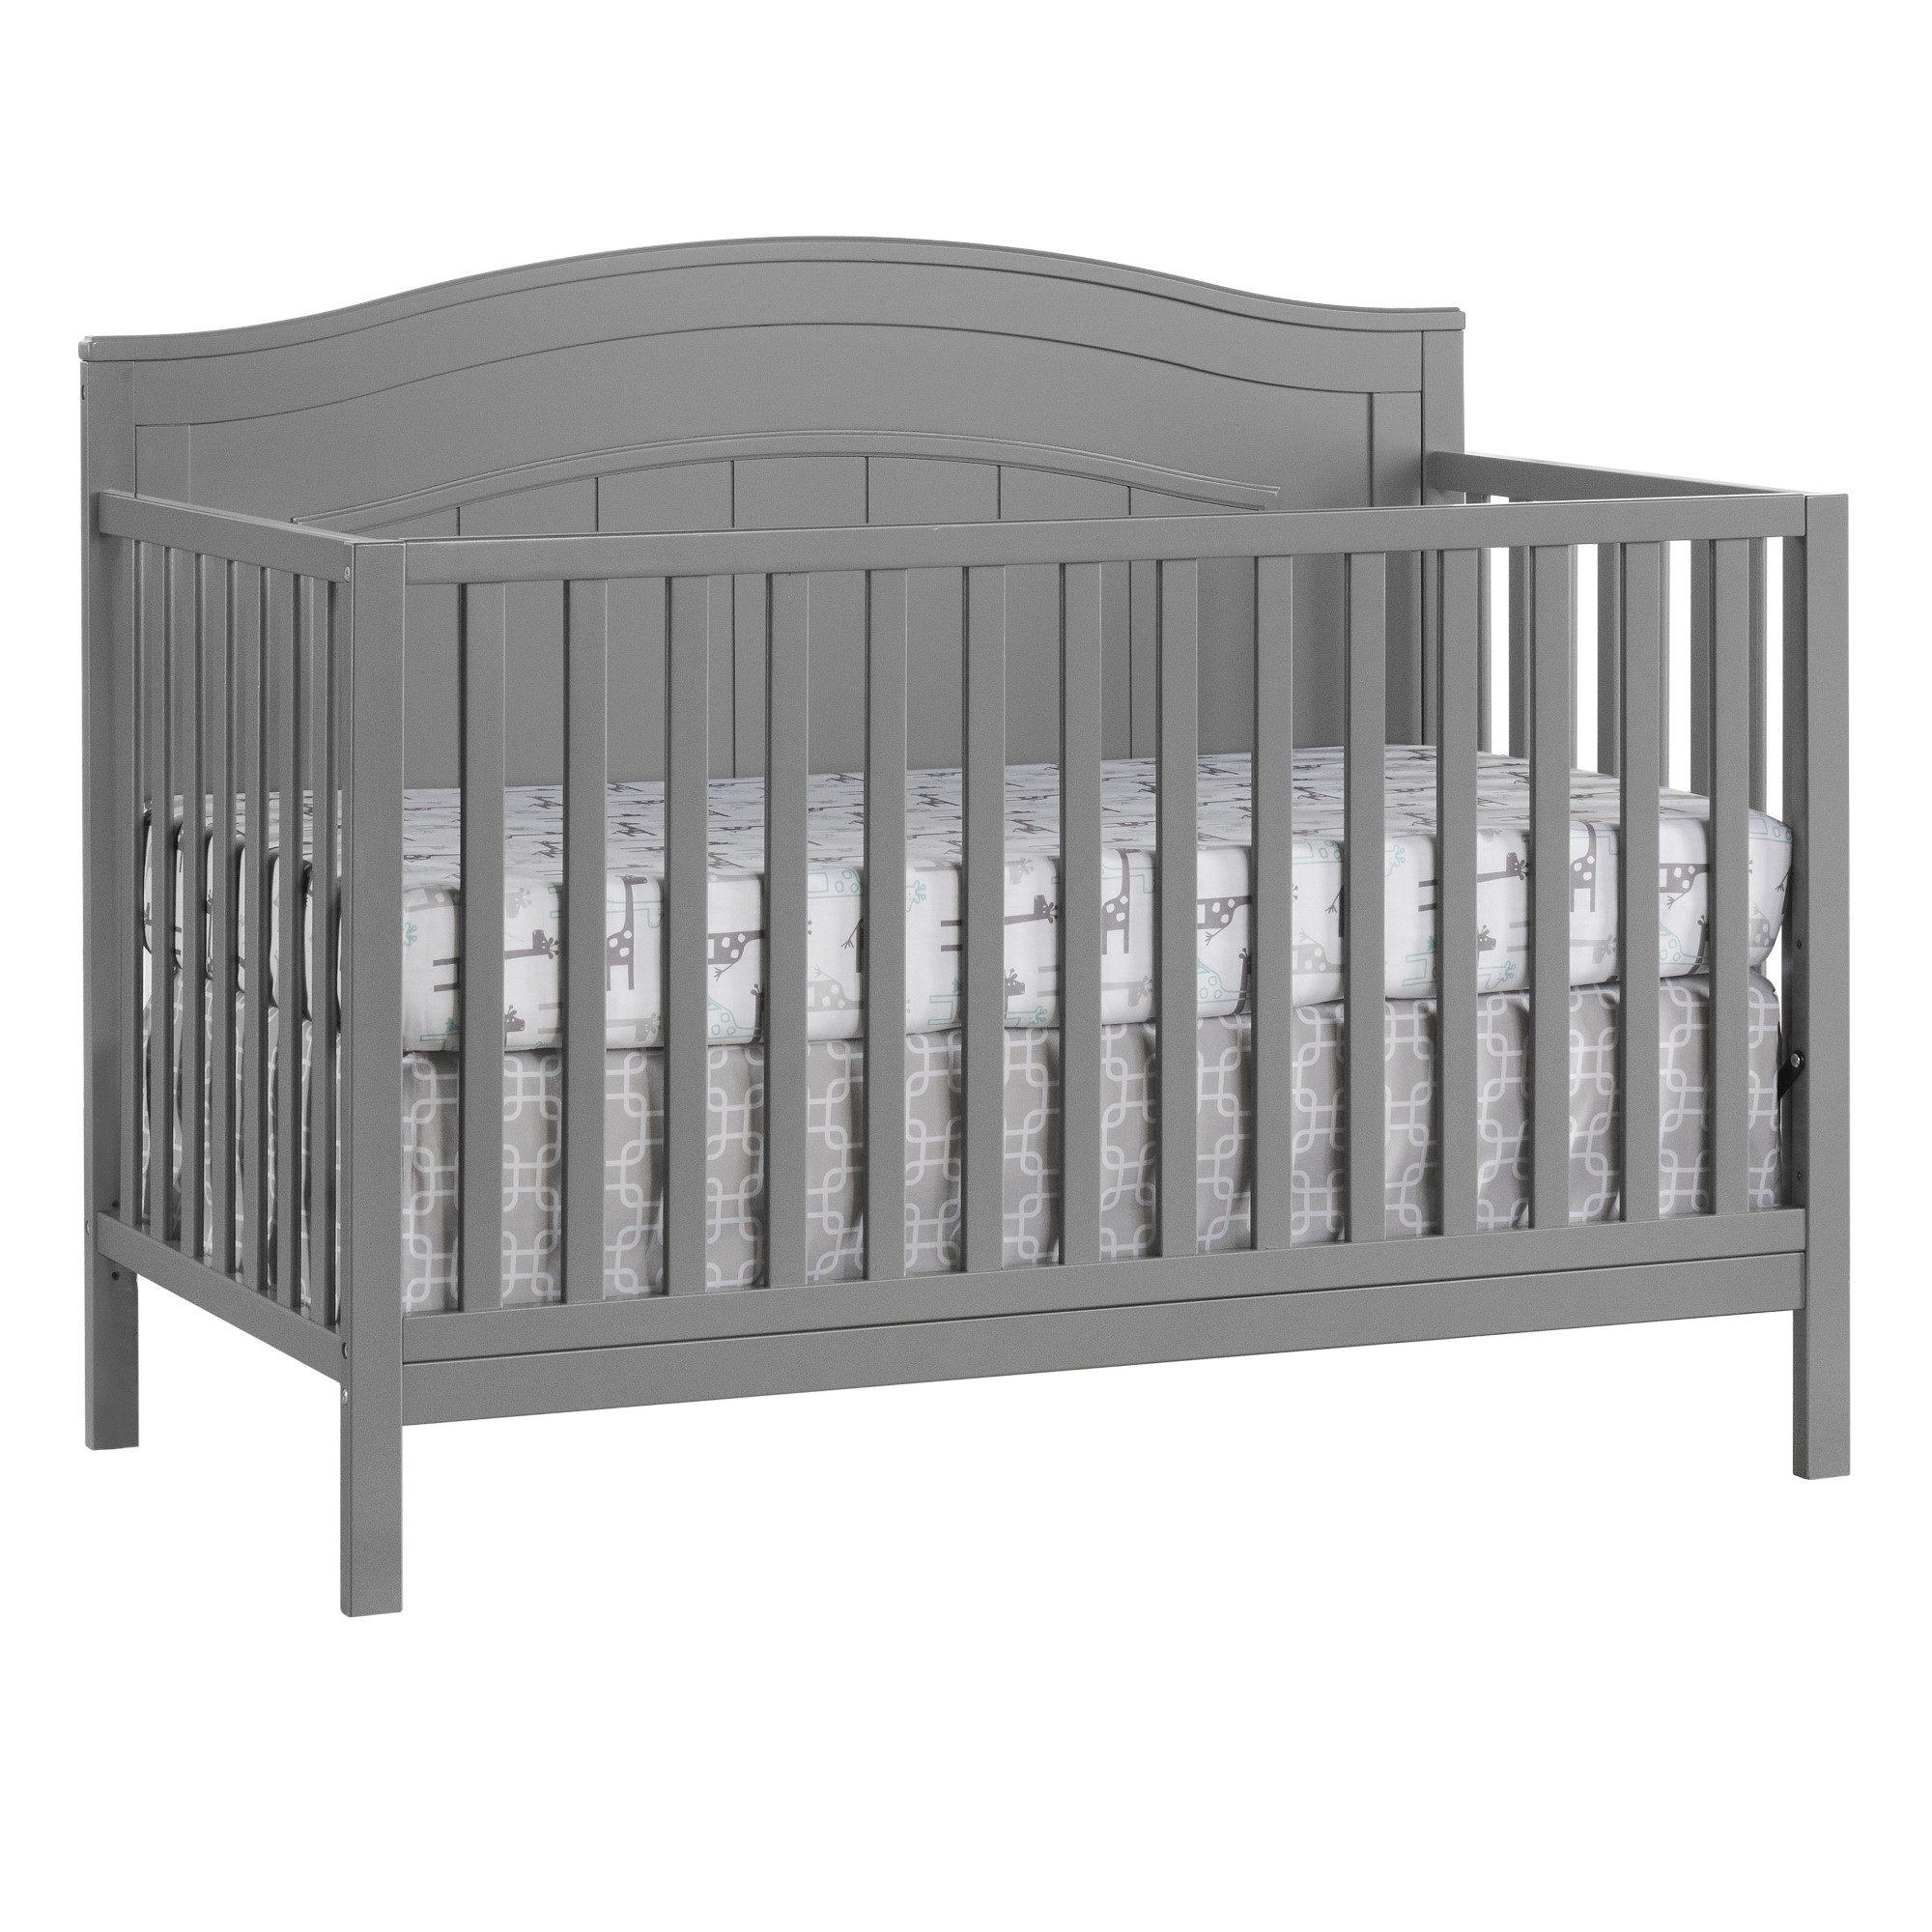 Oxford Baby North Bay 4-in-1 Convertible Crib, Dove Gray, GREENGUARD Gold Certified, Wooden Crib - image 5 of 12